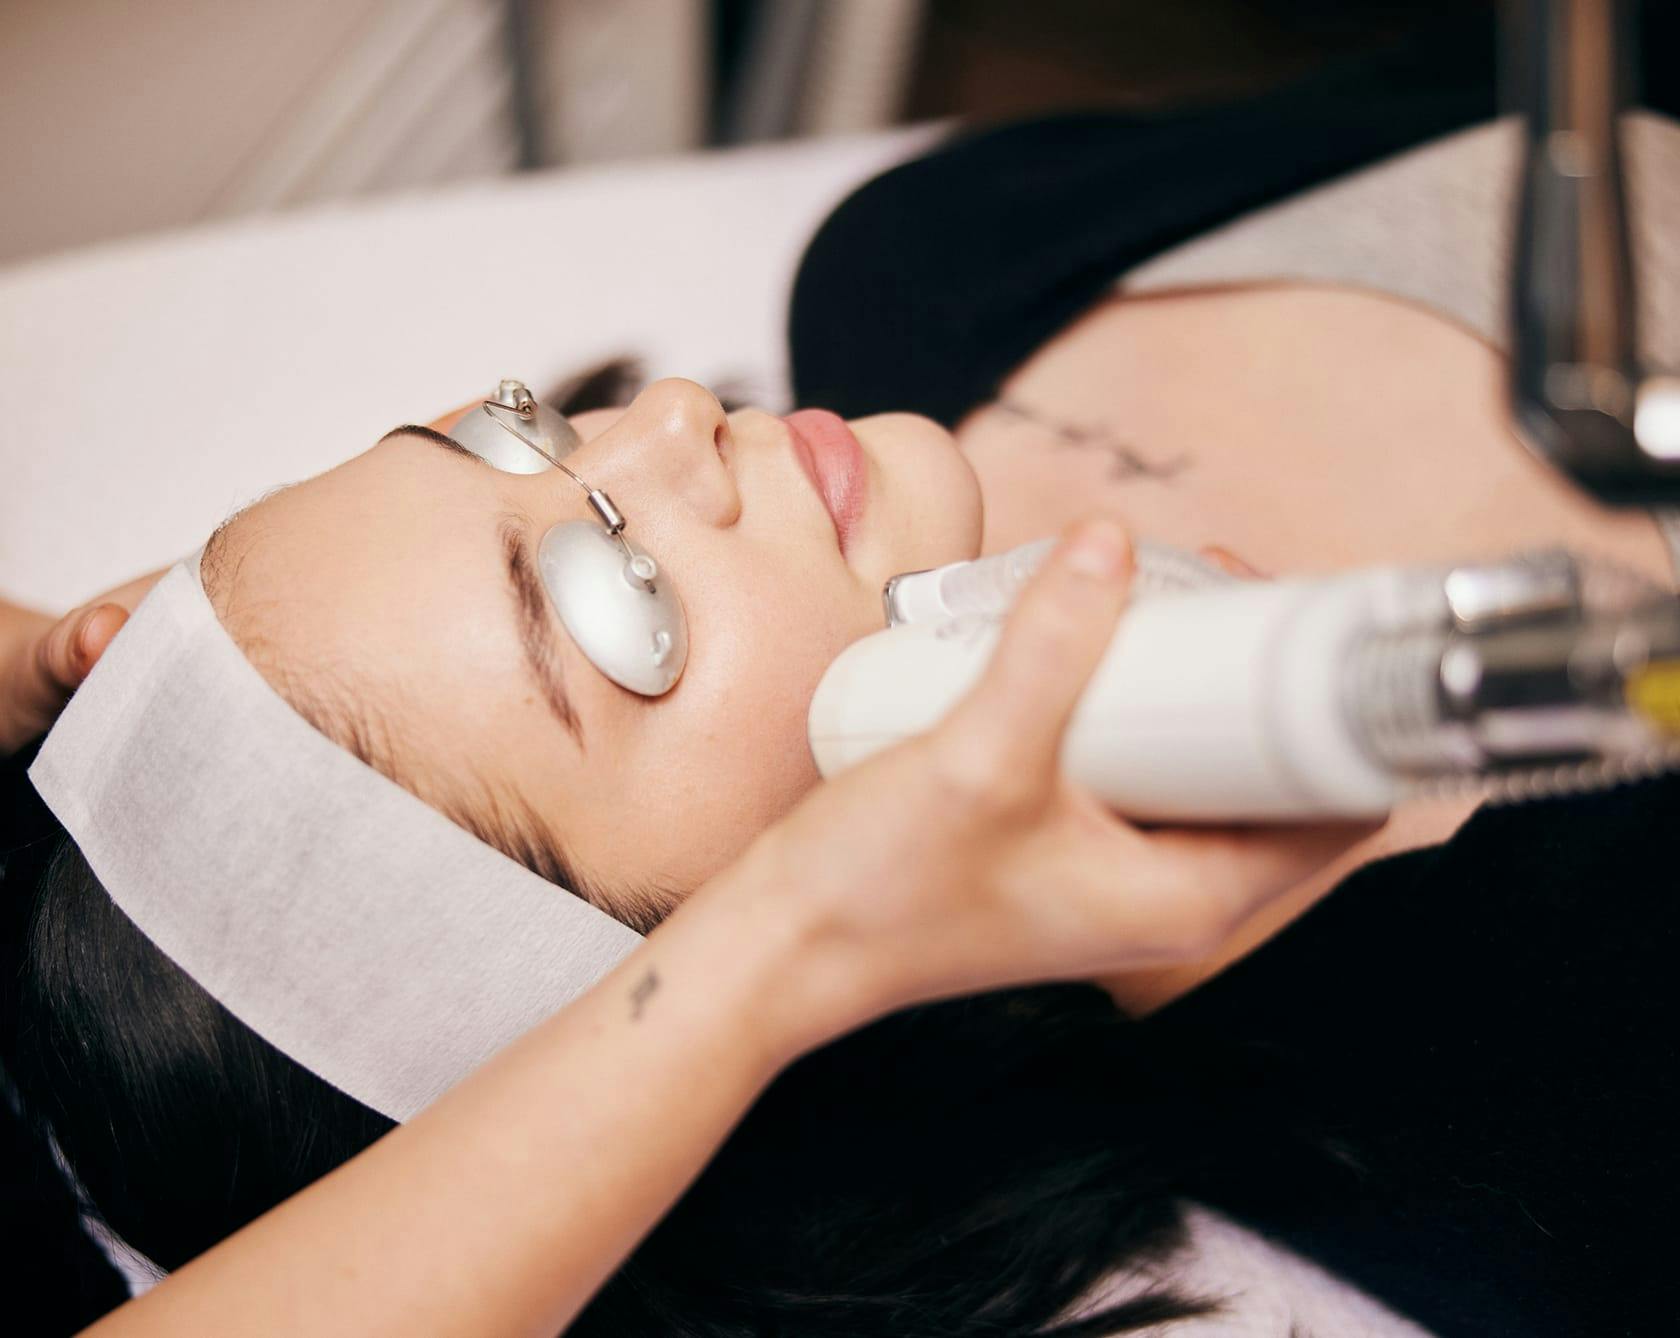 an image of a woman getting a laser facial